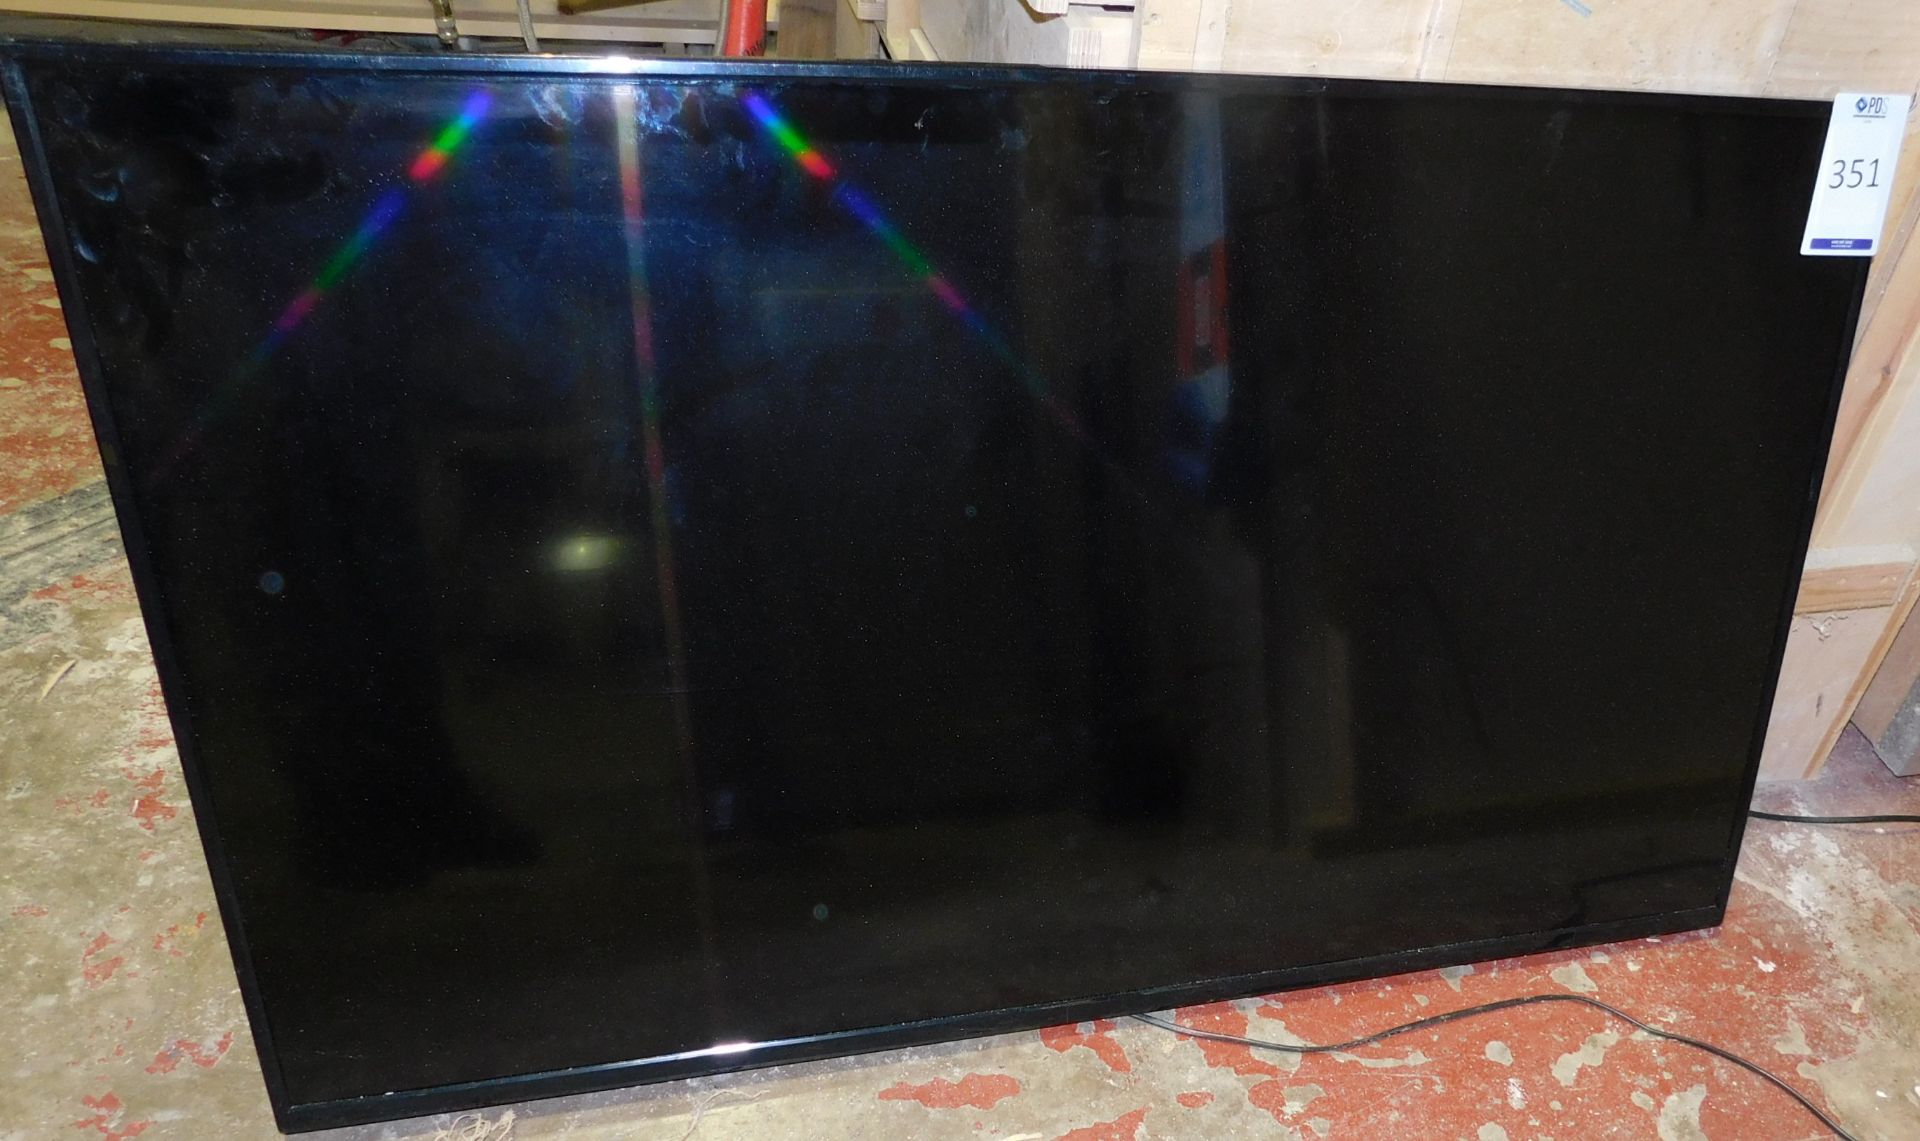 JVC LT-48C570 LED Backlit LCD Television (Location: Stockport. Please Refer to General Notes)